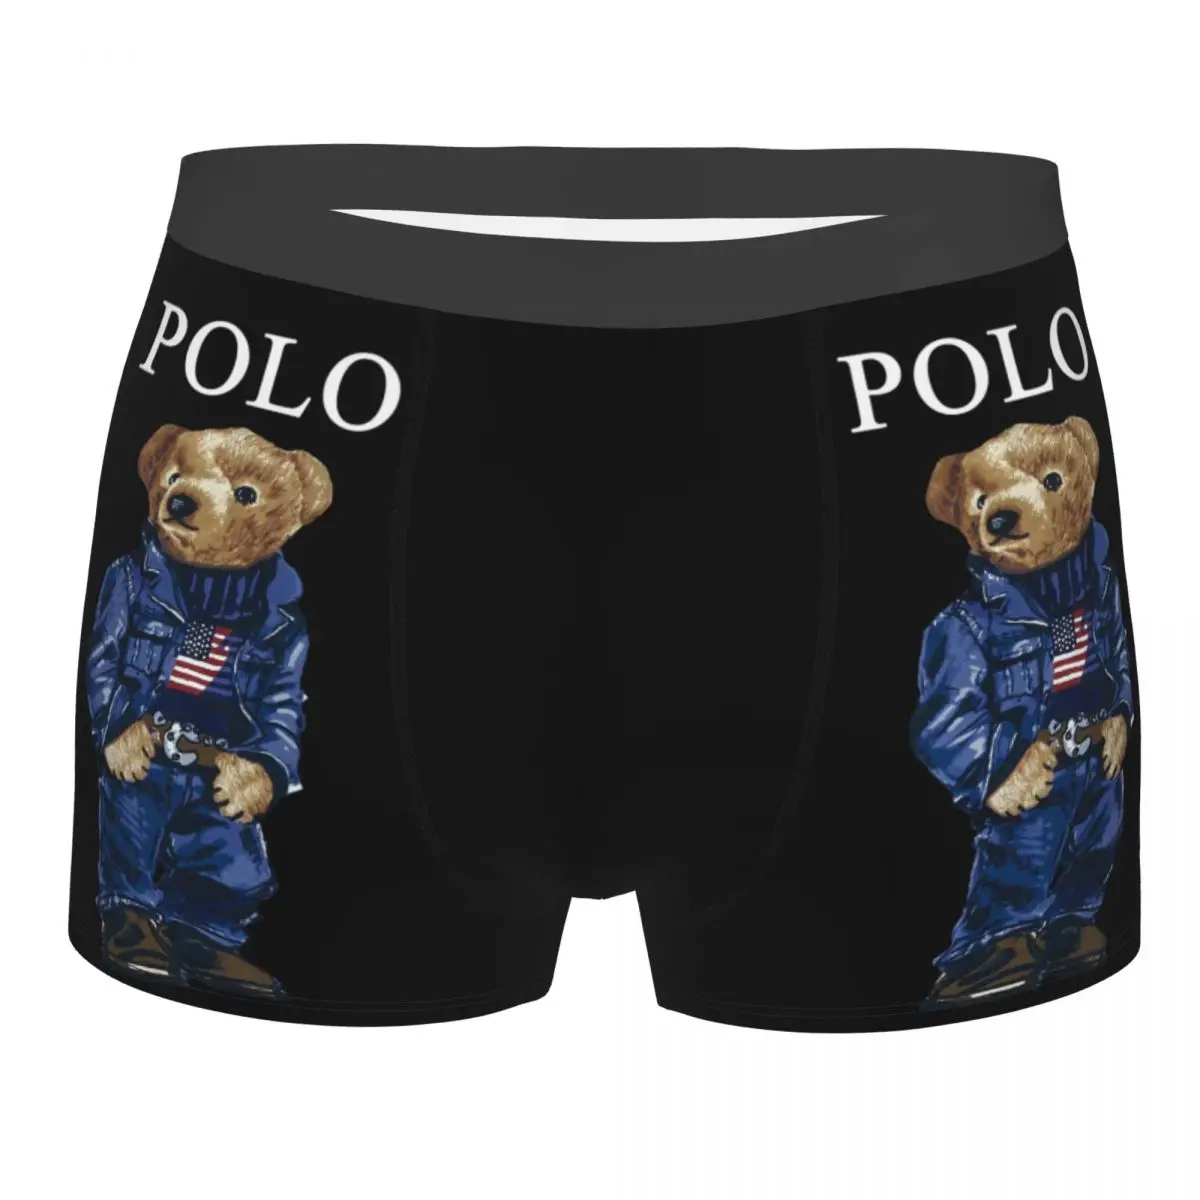 Teddy Bear Men's Boxer Briefs special Highly Breathable Underpants Top Quality 3D Print Shorts Gift Idea pngtree farming tractor green men s boxer briefs special highly breathable underpants top quality 3d print shorts gift idea